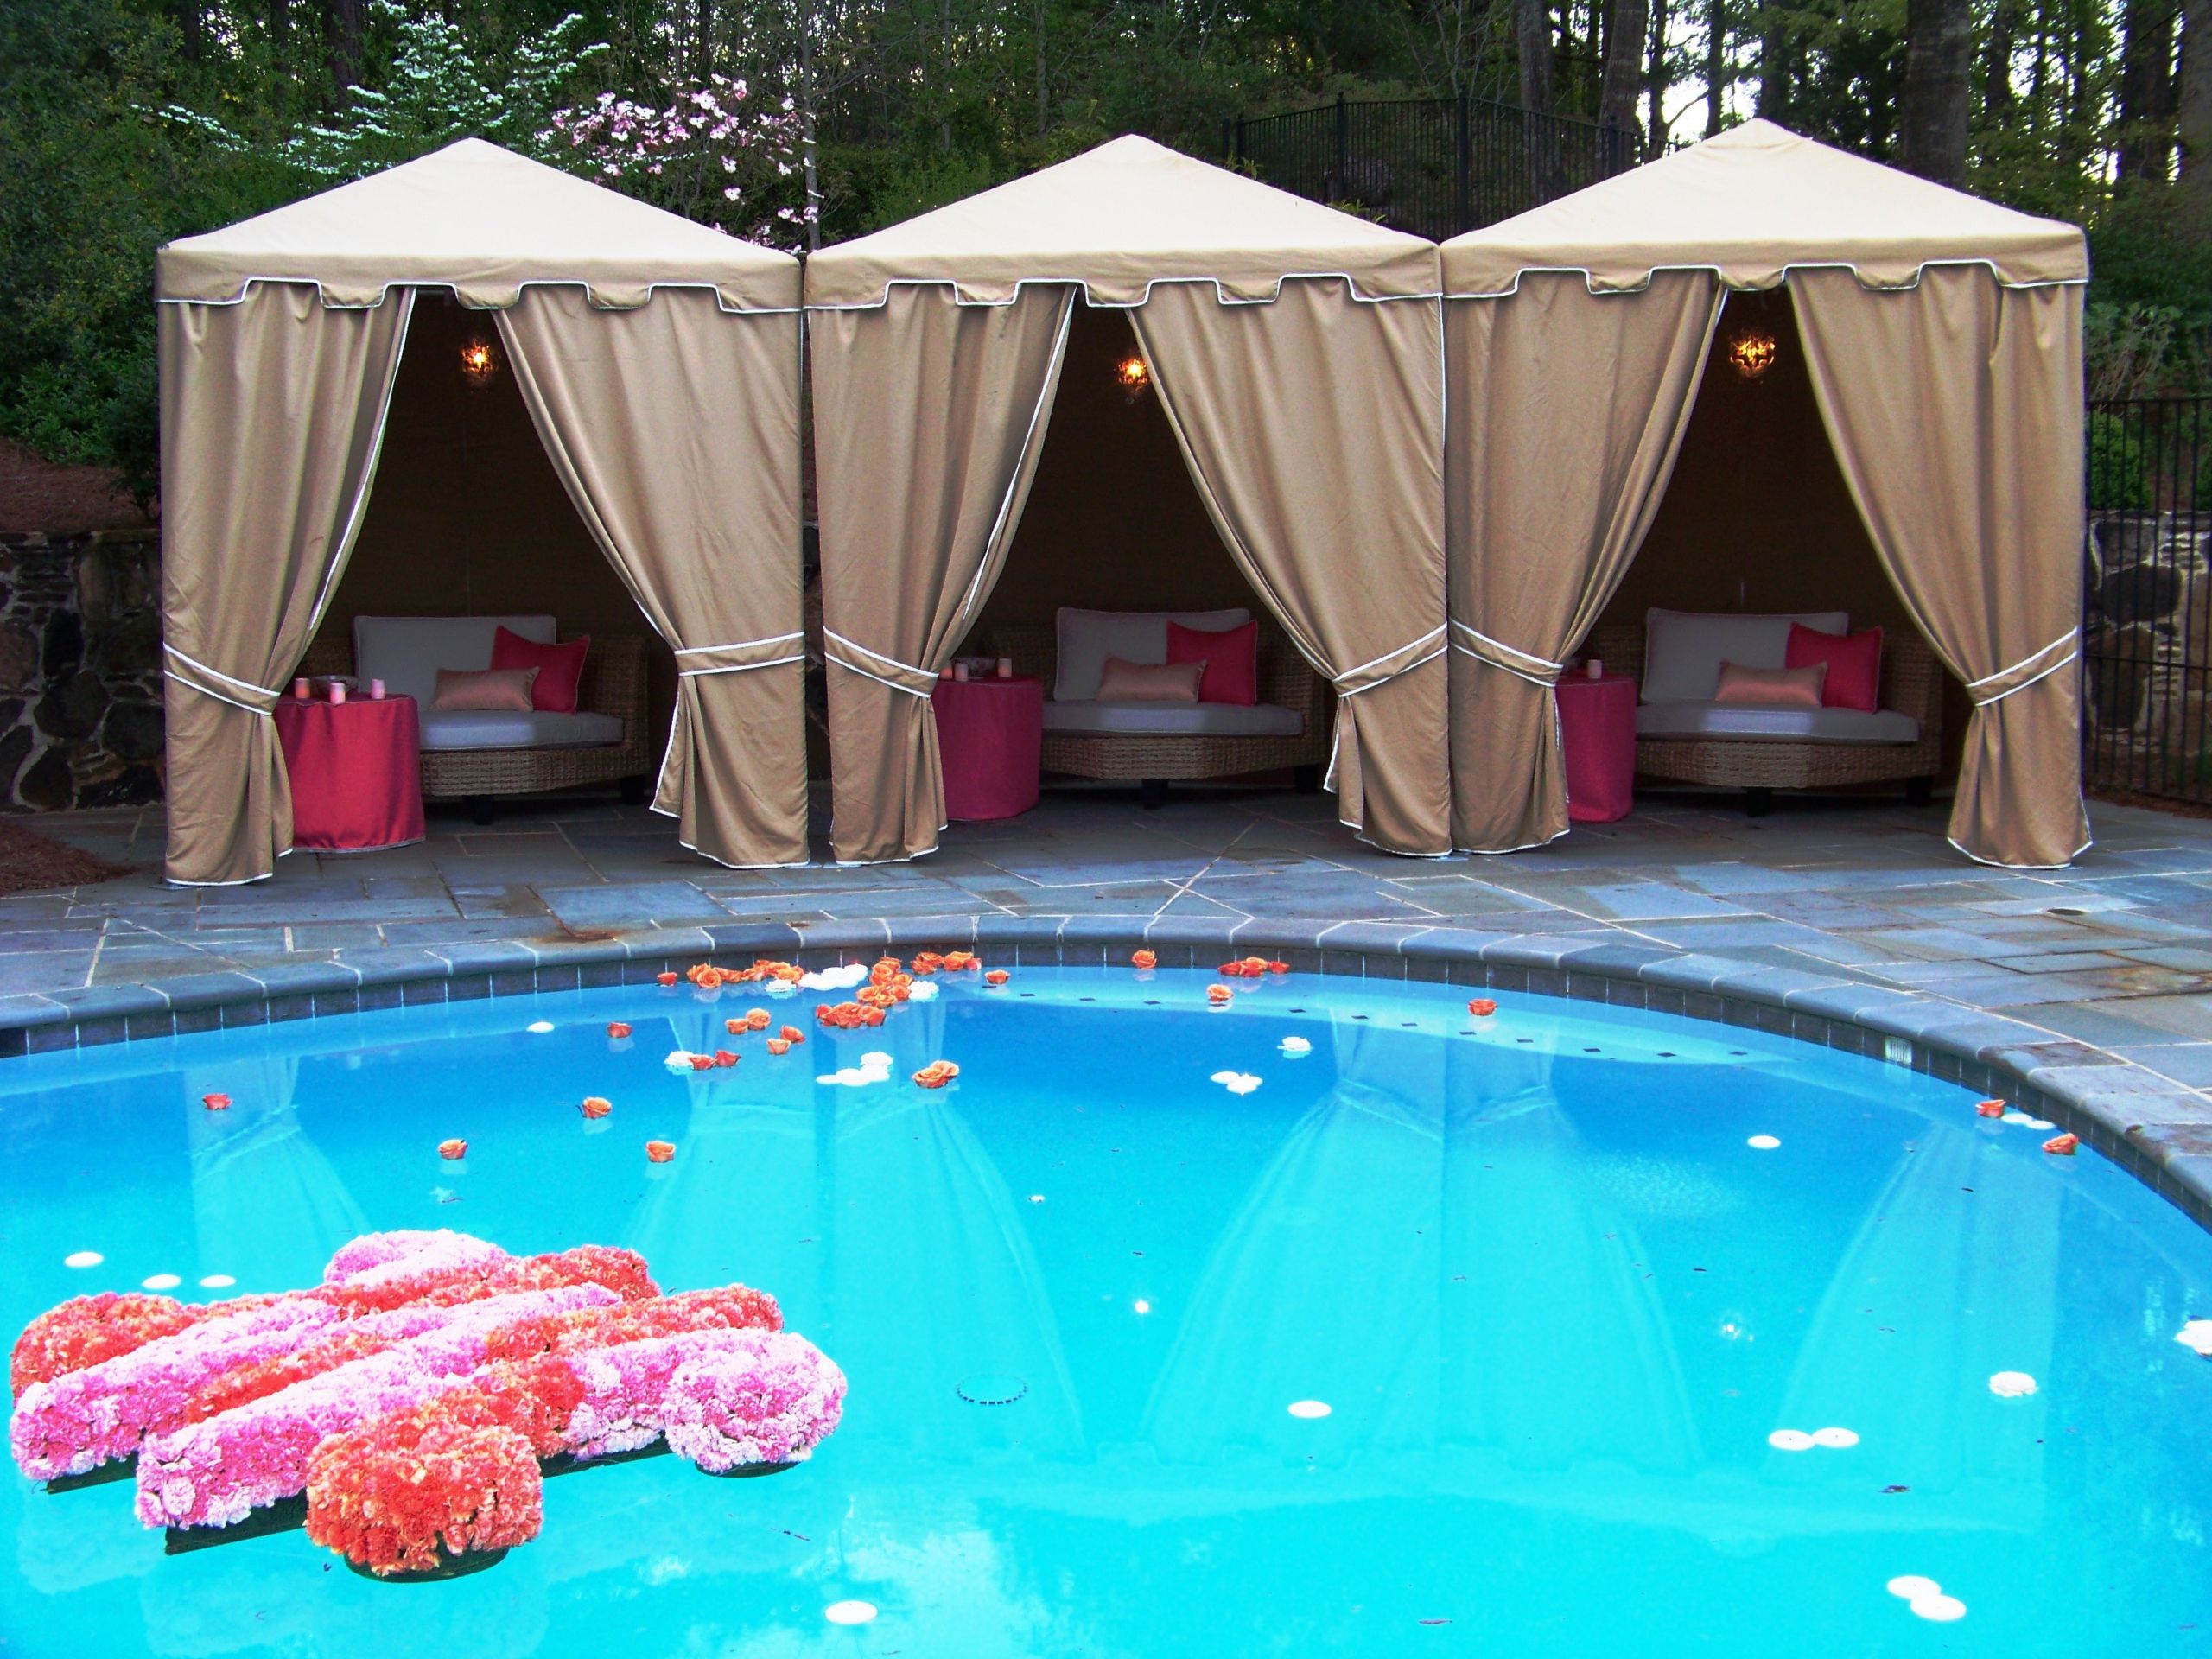 Pool Wedding Decorations
 20 Pool Wedding Decoration Ideas To Try Your Wedding